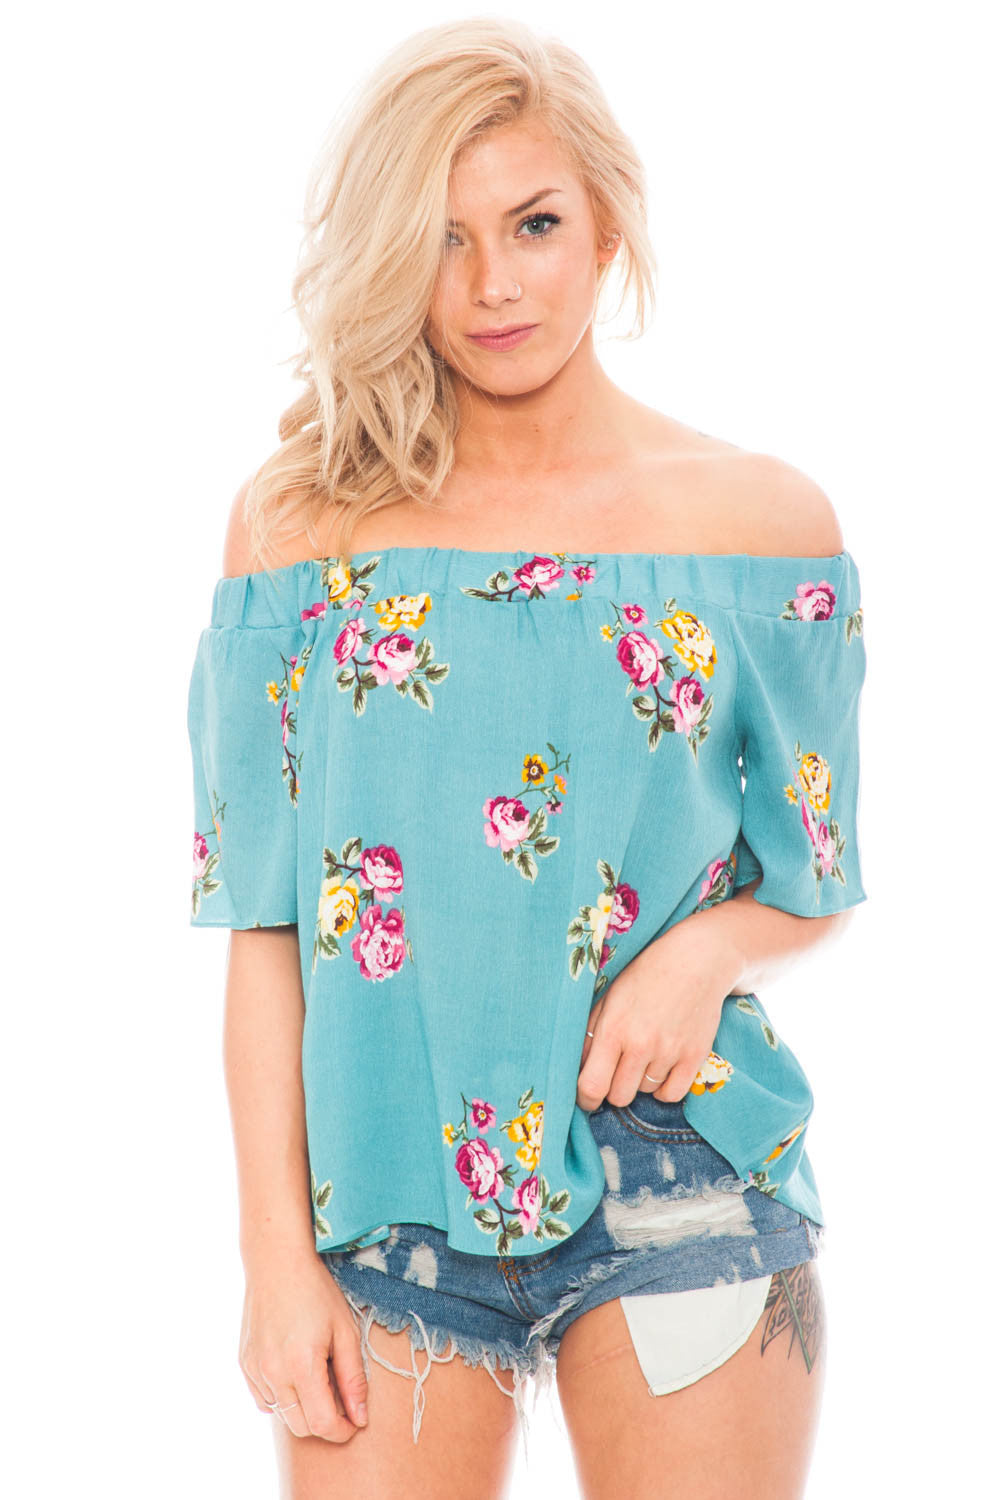 Blouse - Off Shoulder Floral Top by Everly